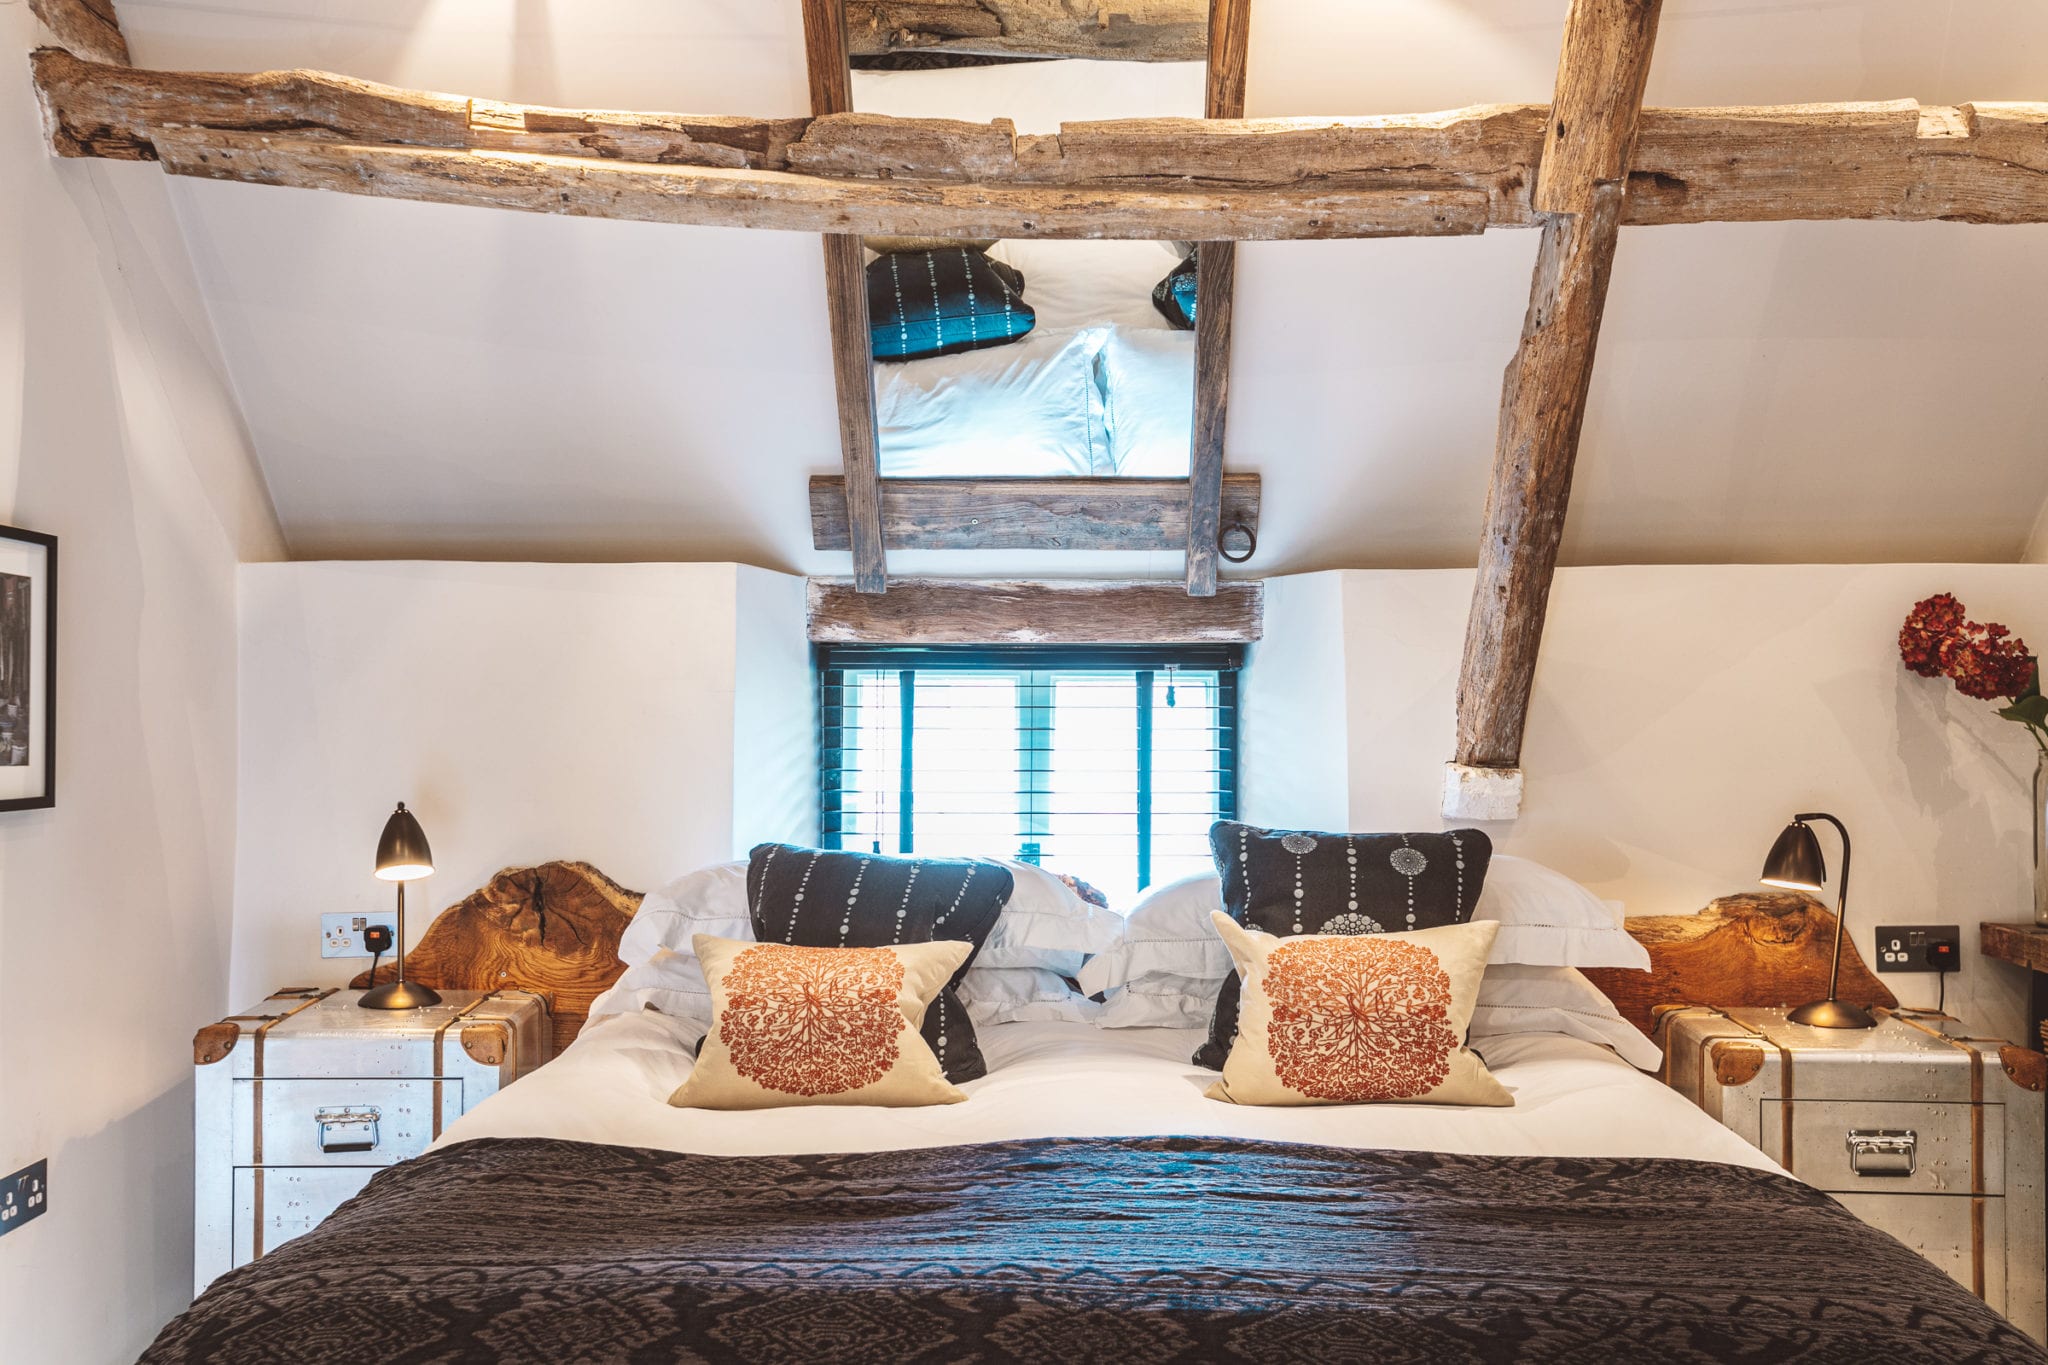 A large bed underneath striking exposed wooden beams